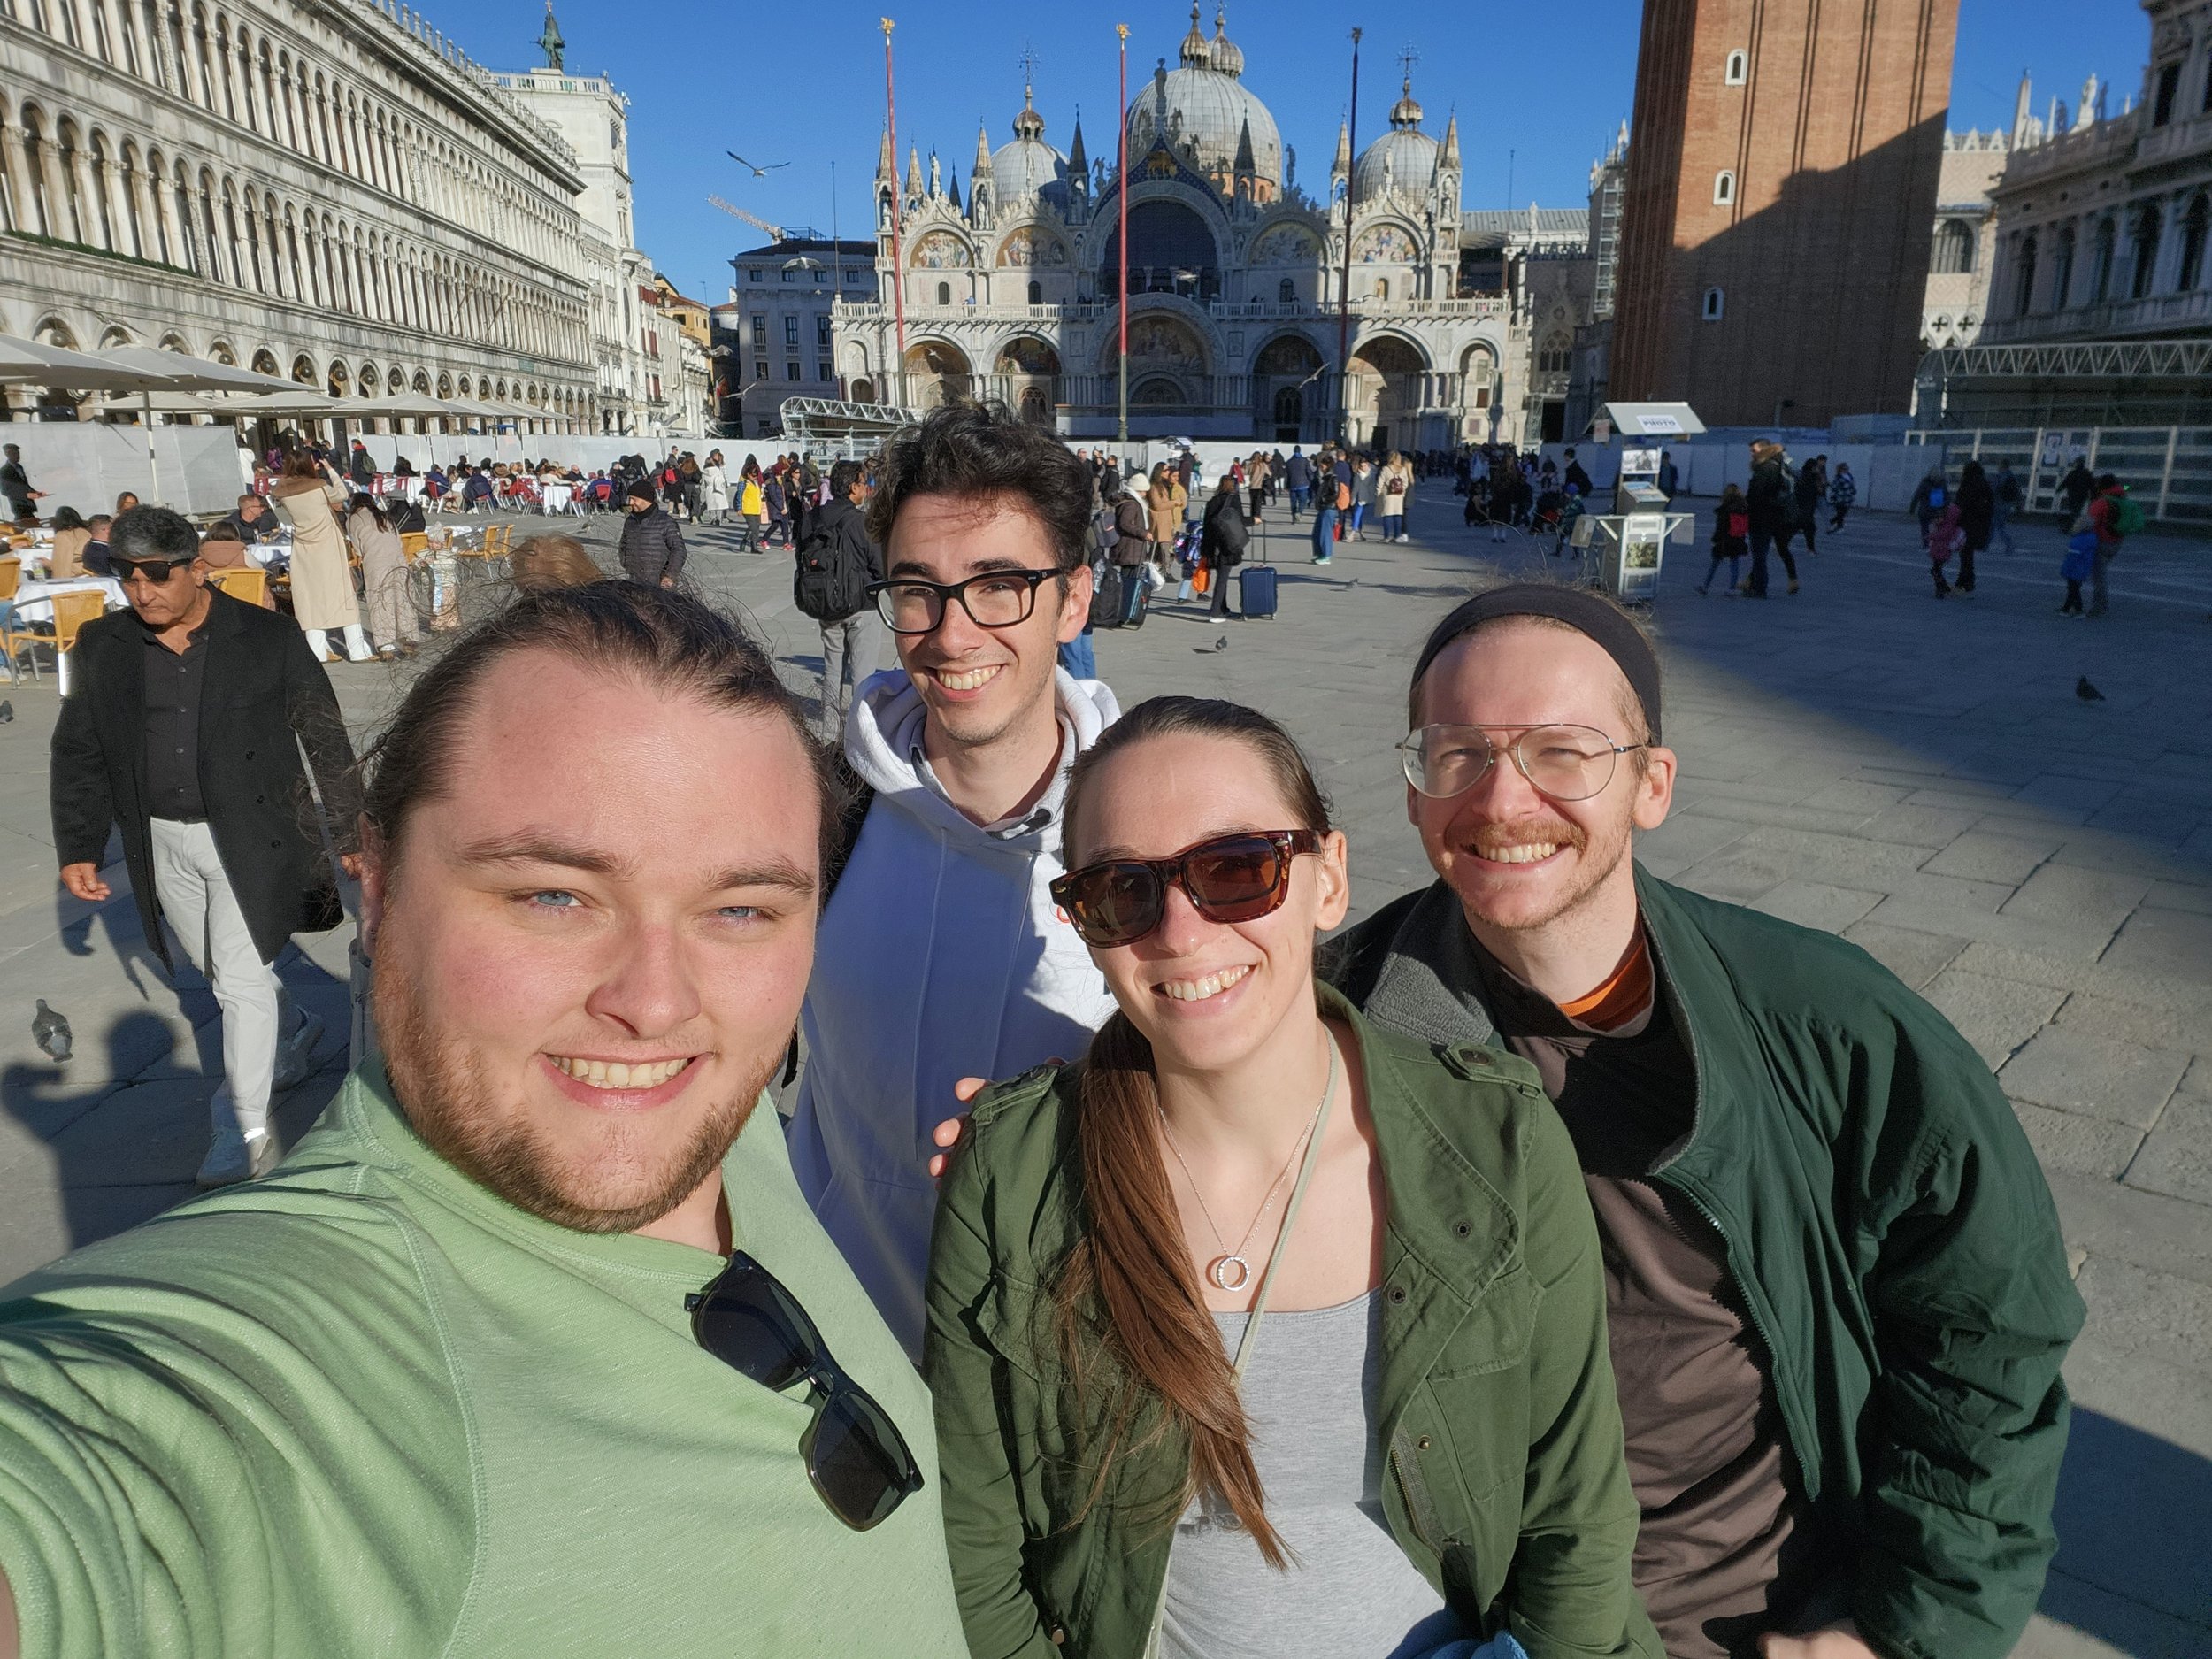   Mattinson, Gutierrez, Ware, and Engle at the Piazza San Marco in Venice, Italy  